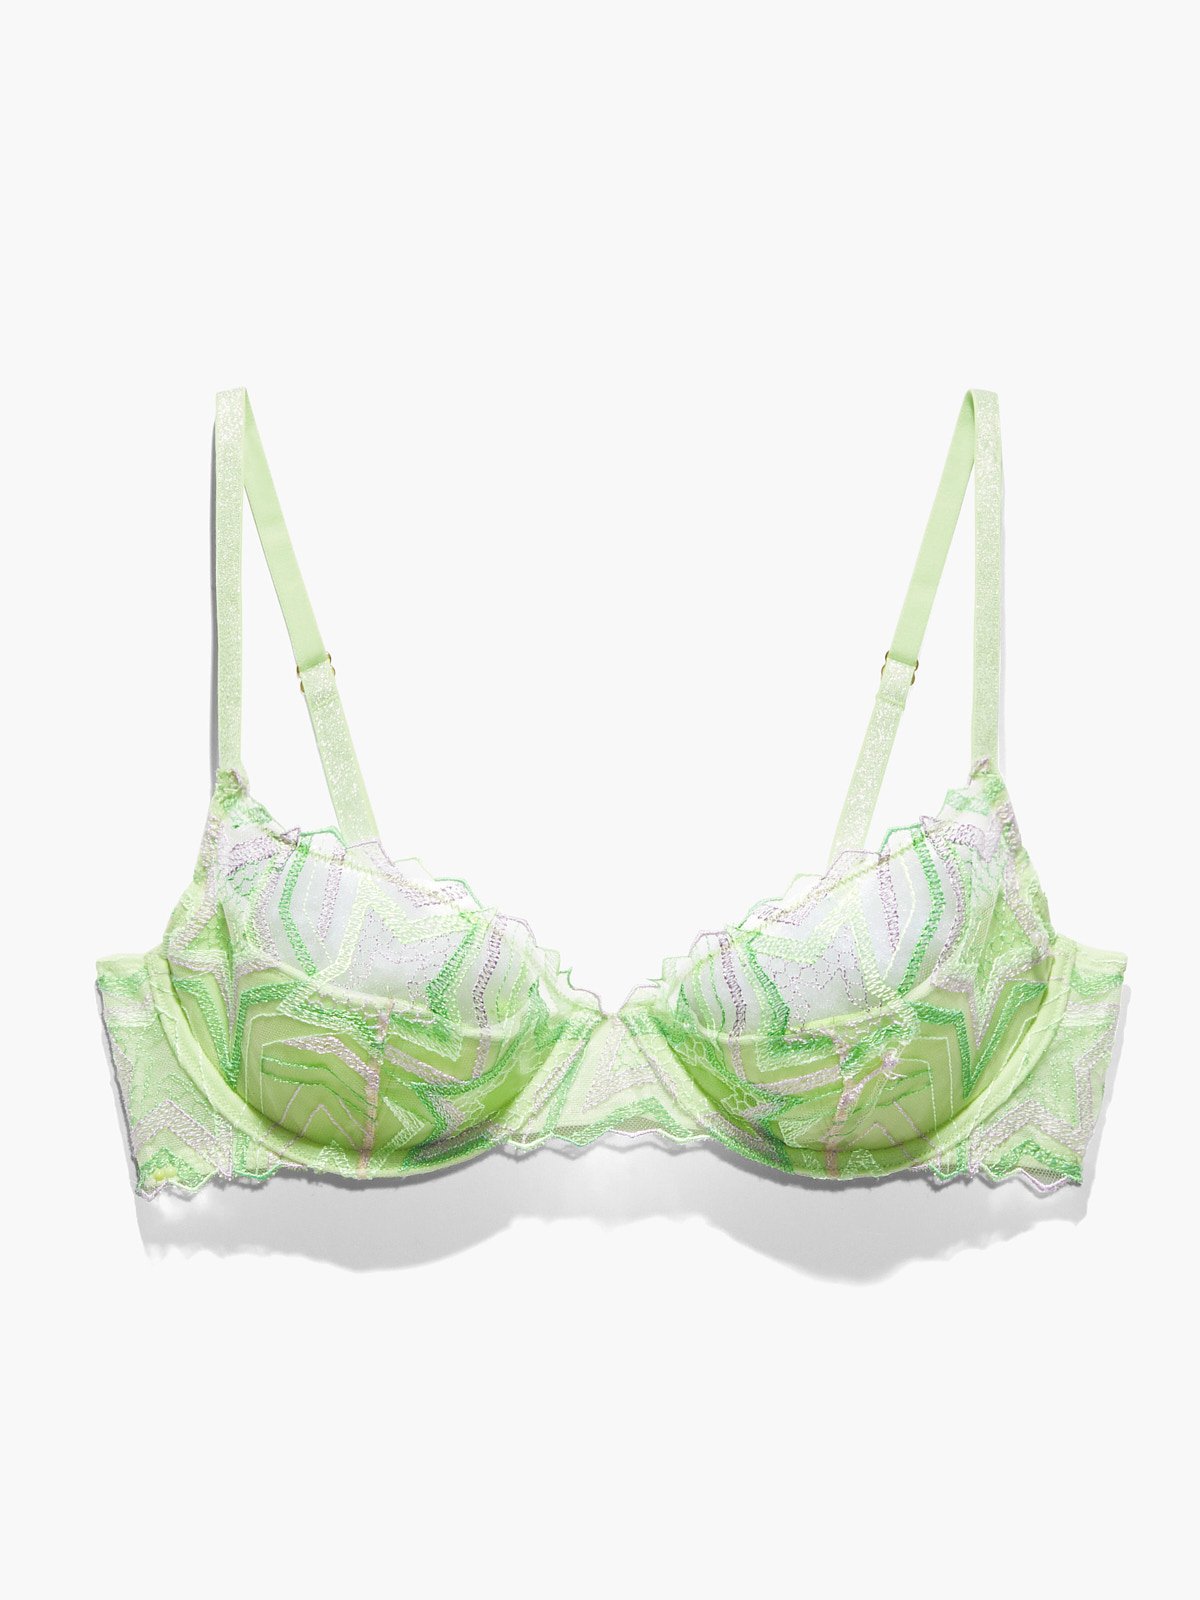 Shining Star Embroidered Half Cup Plunge Bra in Green & Multi